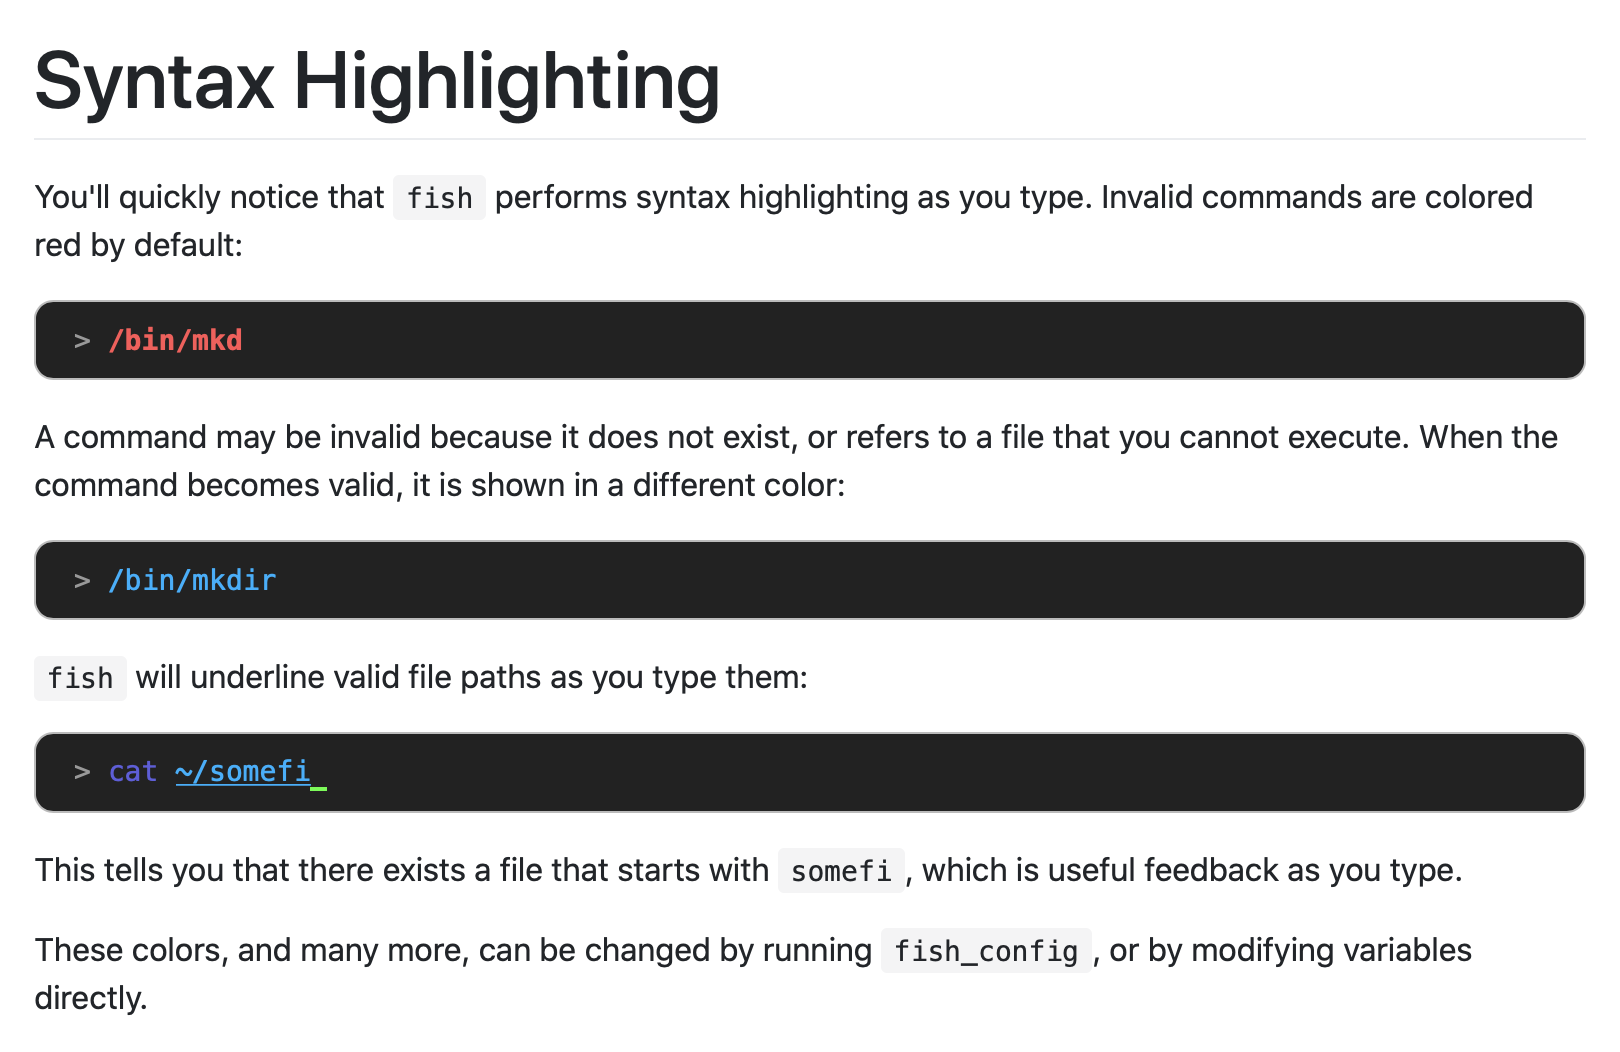 Syntax highlighting in Fish.